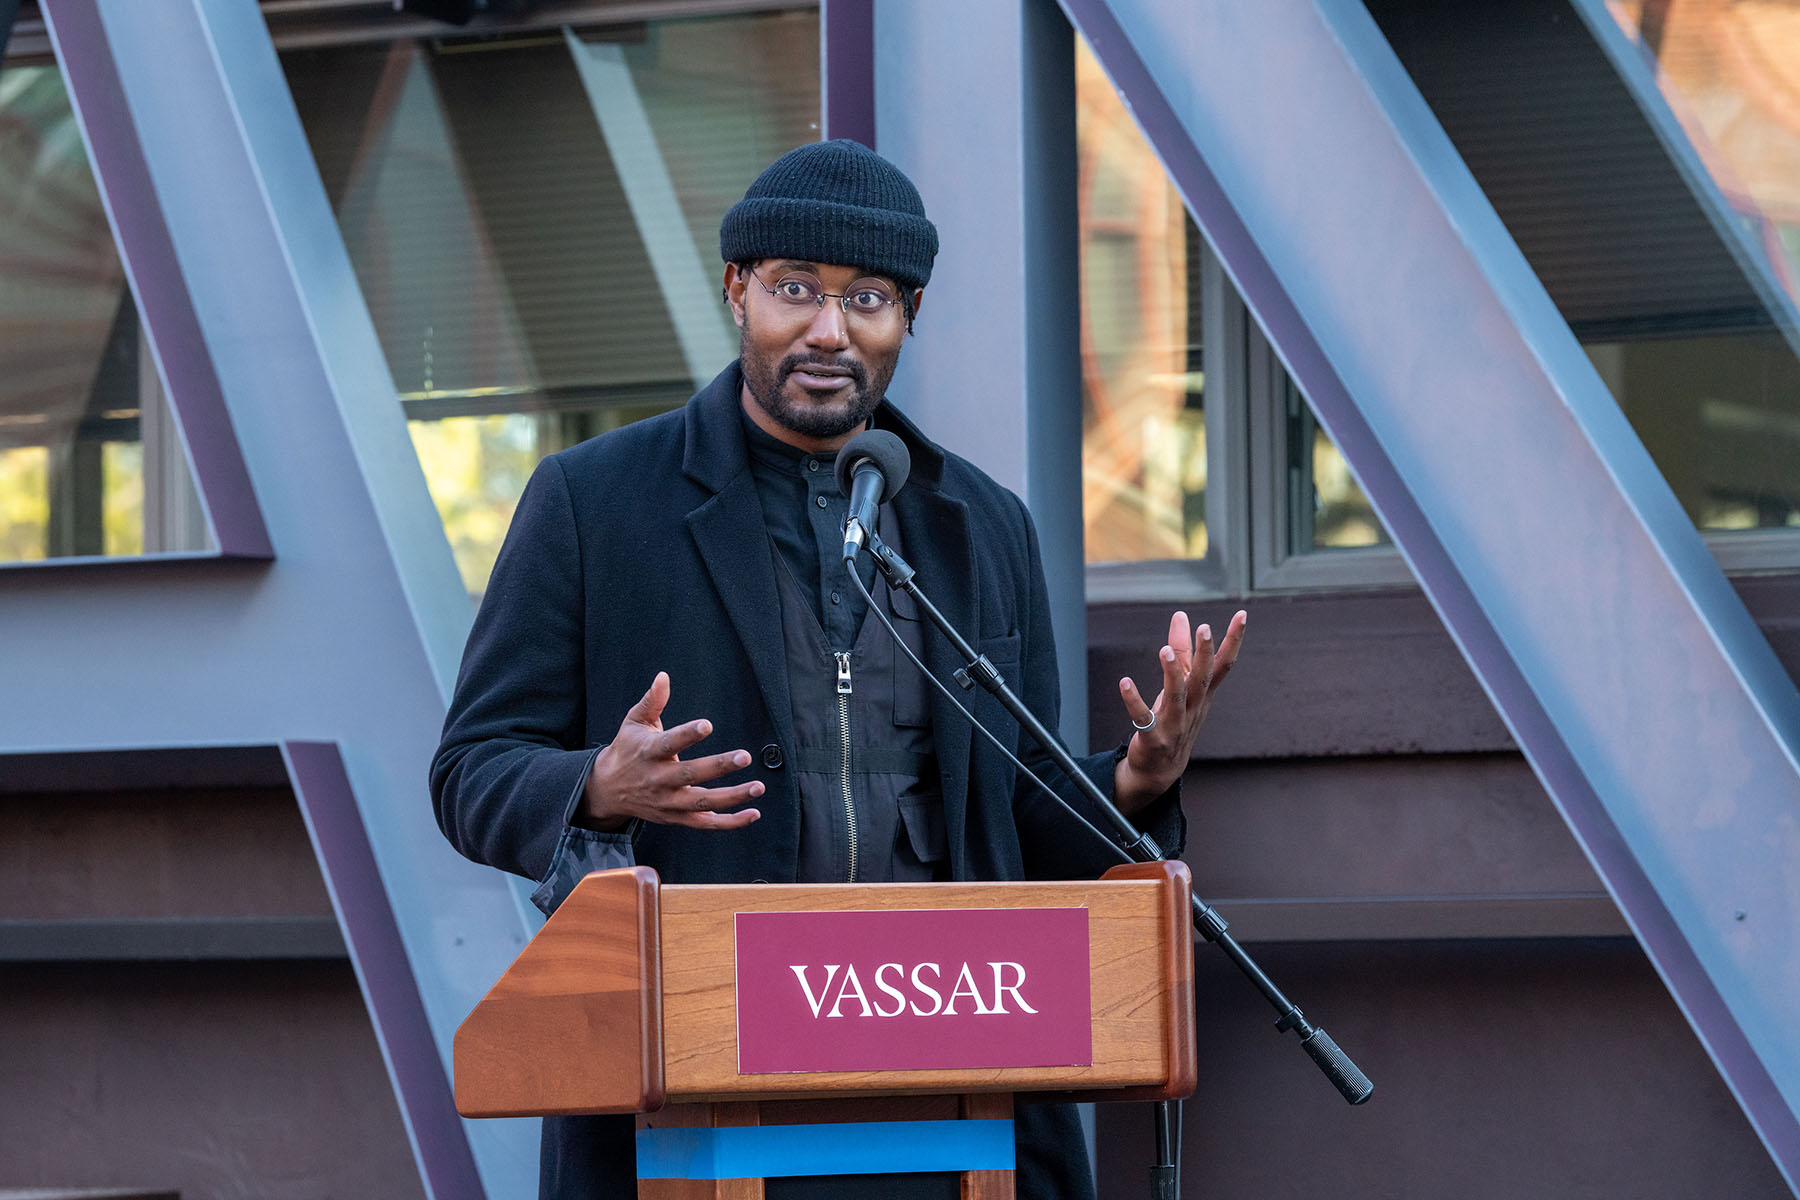 Man wearing a black shirt, black coat and black wool hat standing at a podium with "Vassar" on the front and microphone attached